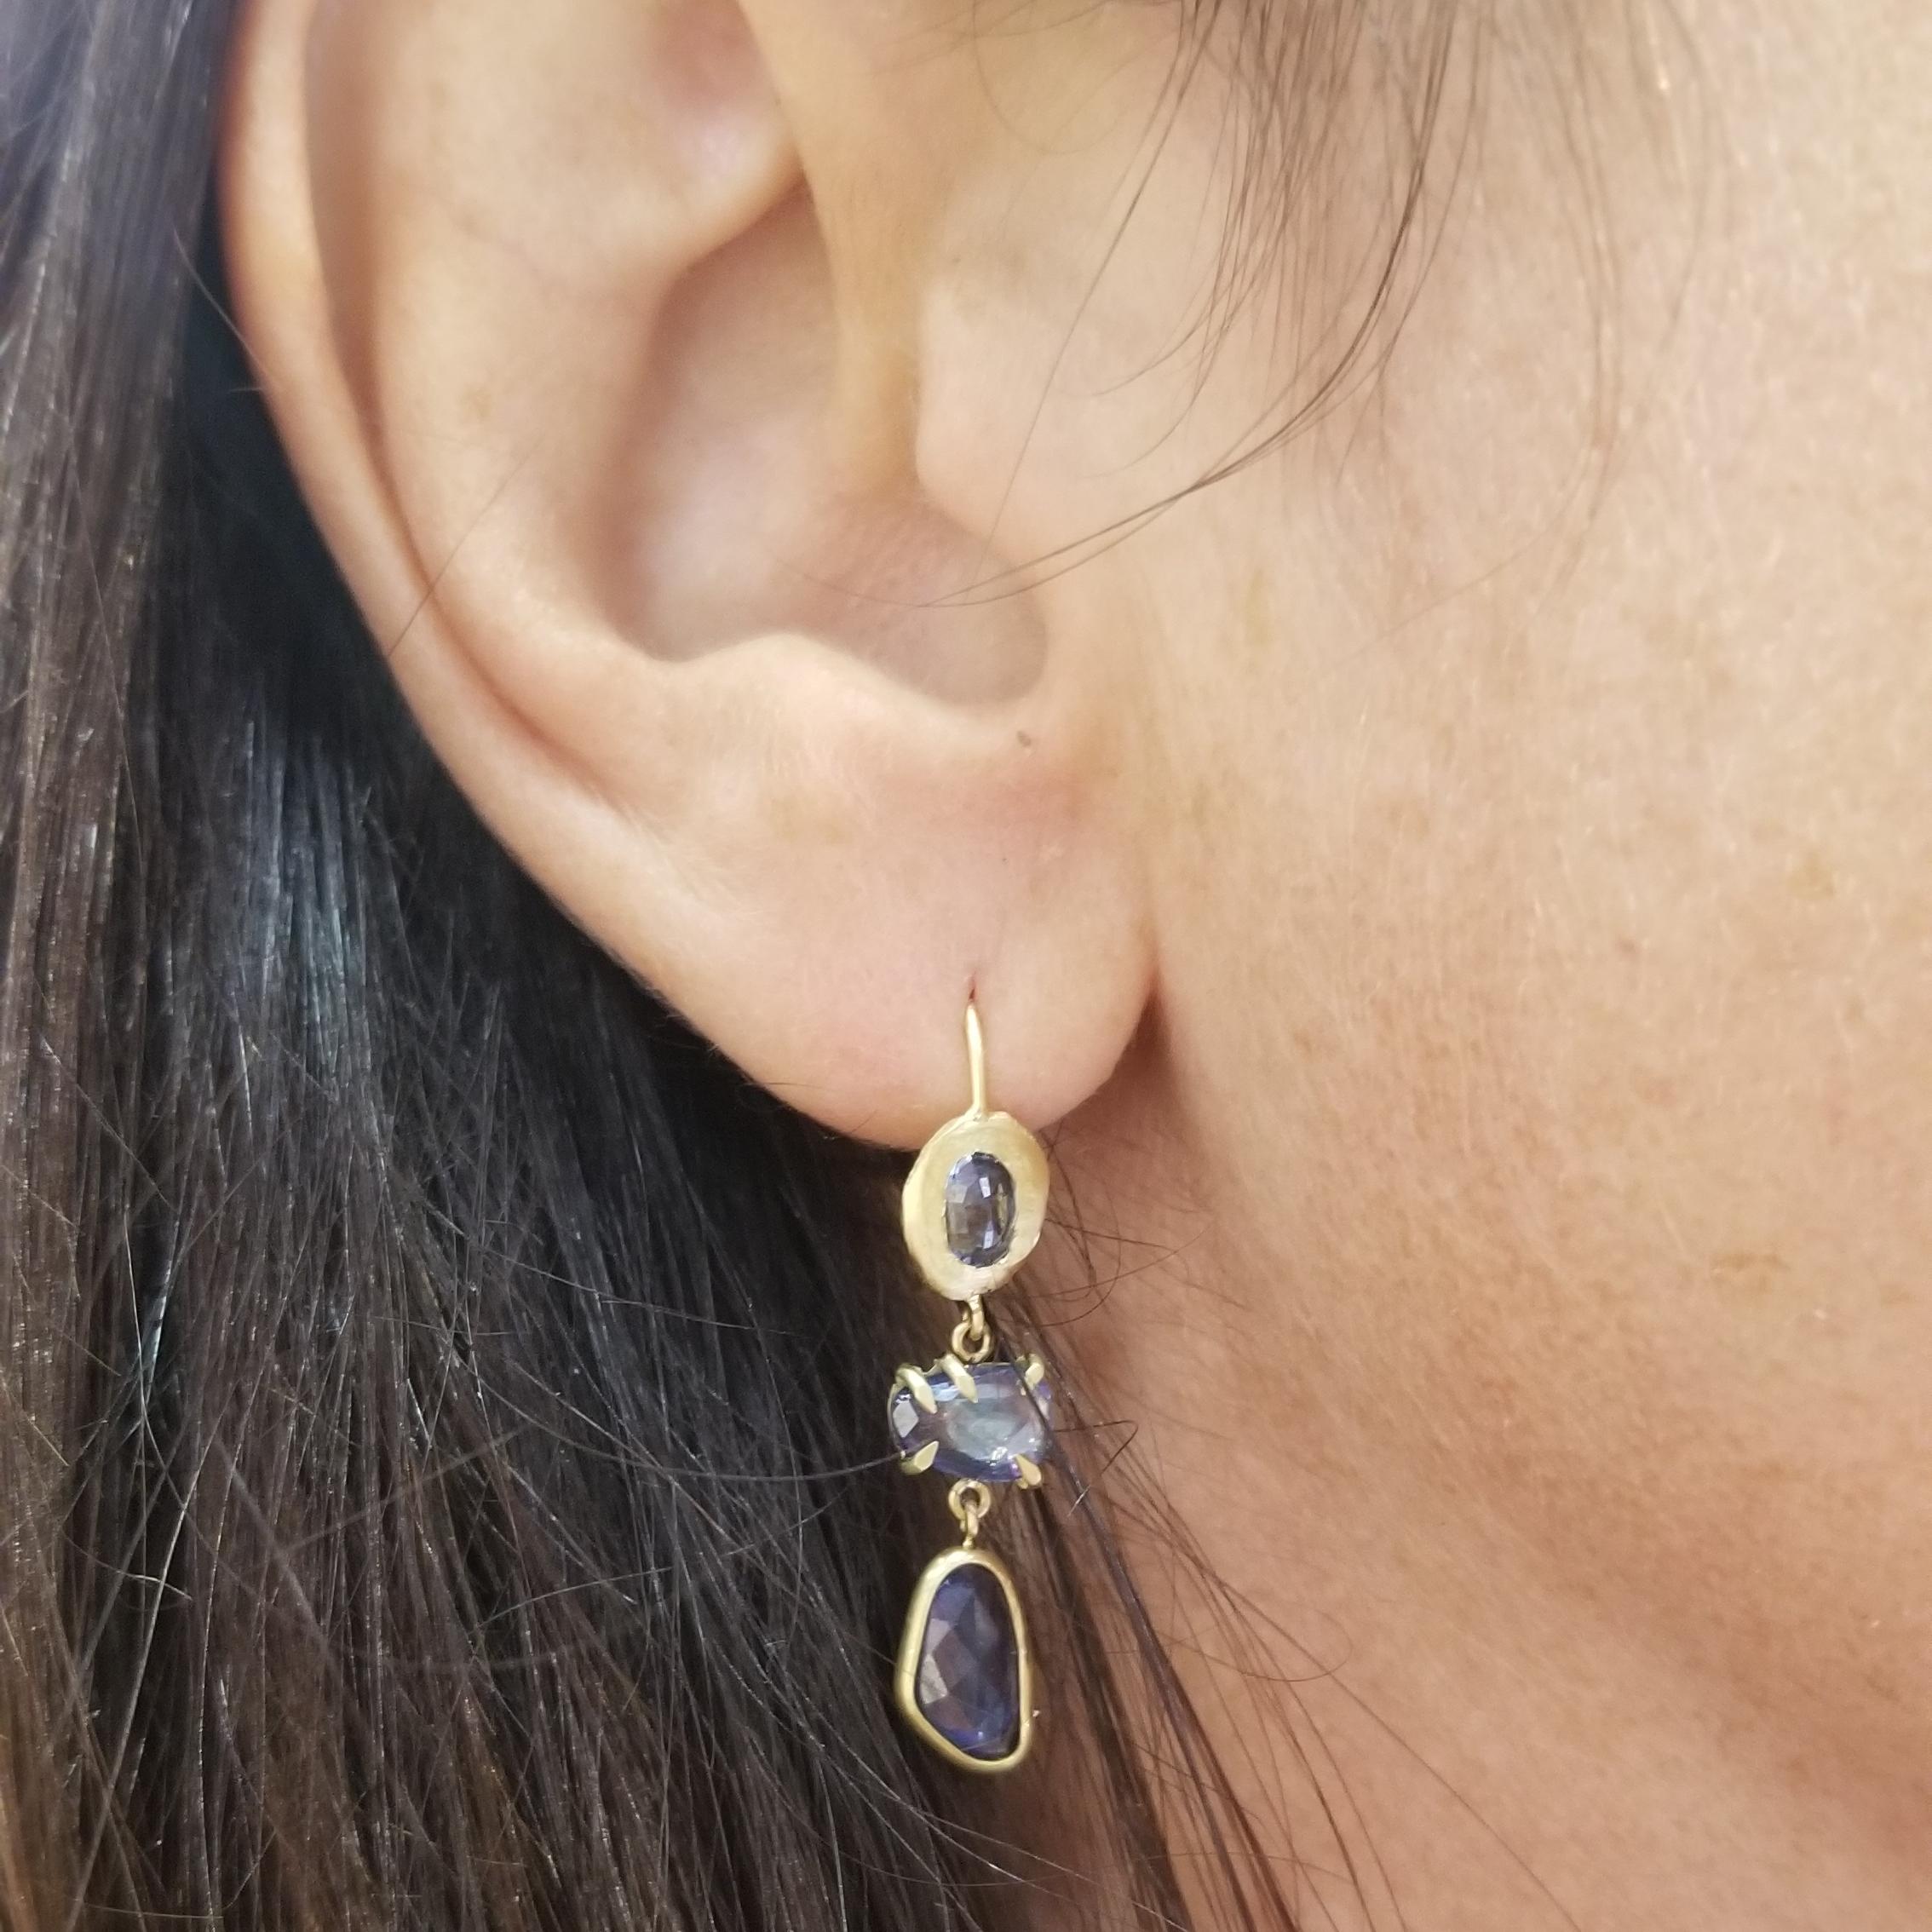 18KT gold blue sapphire earrings, featuring prong and bezel set one of a kind sapphires with french hooks. Handmade by NYC artist Page Sargisson, this style is one of her best sellers.
